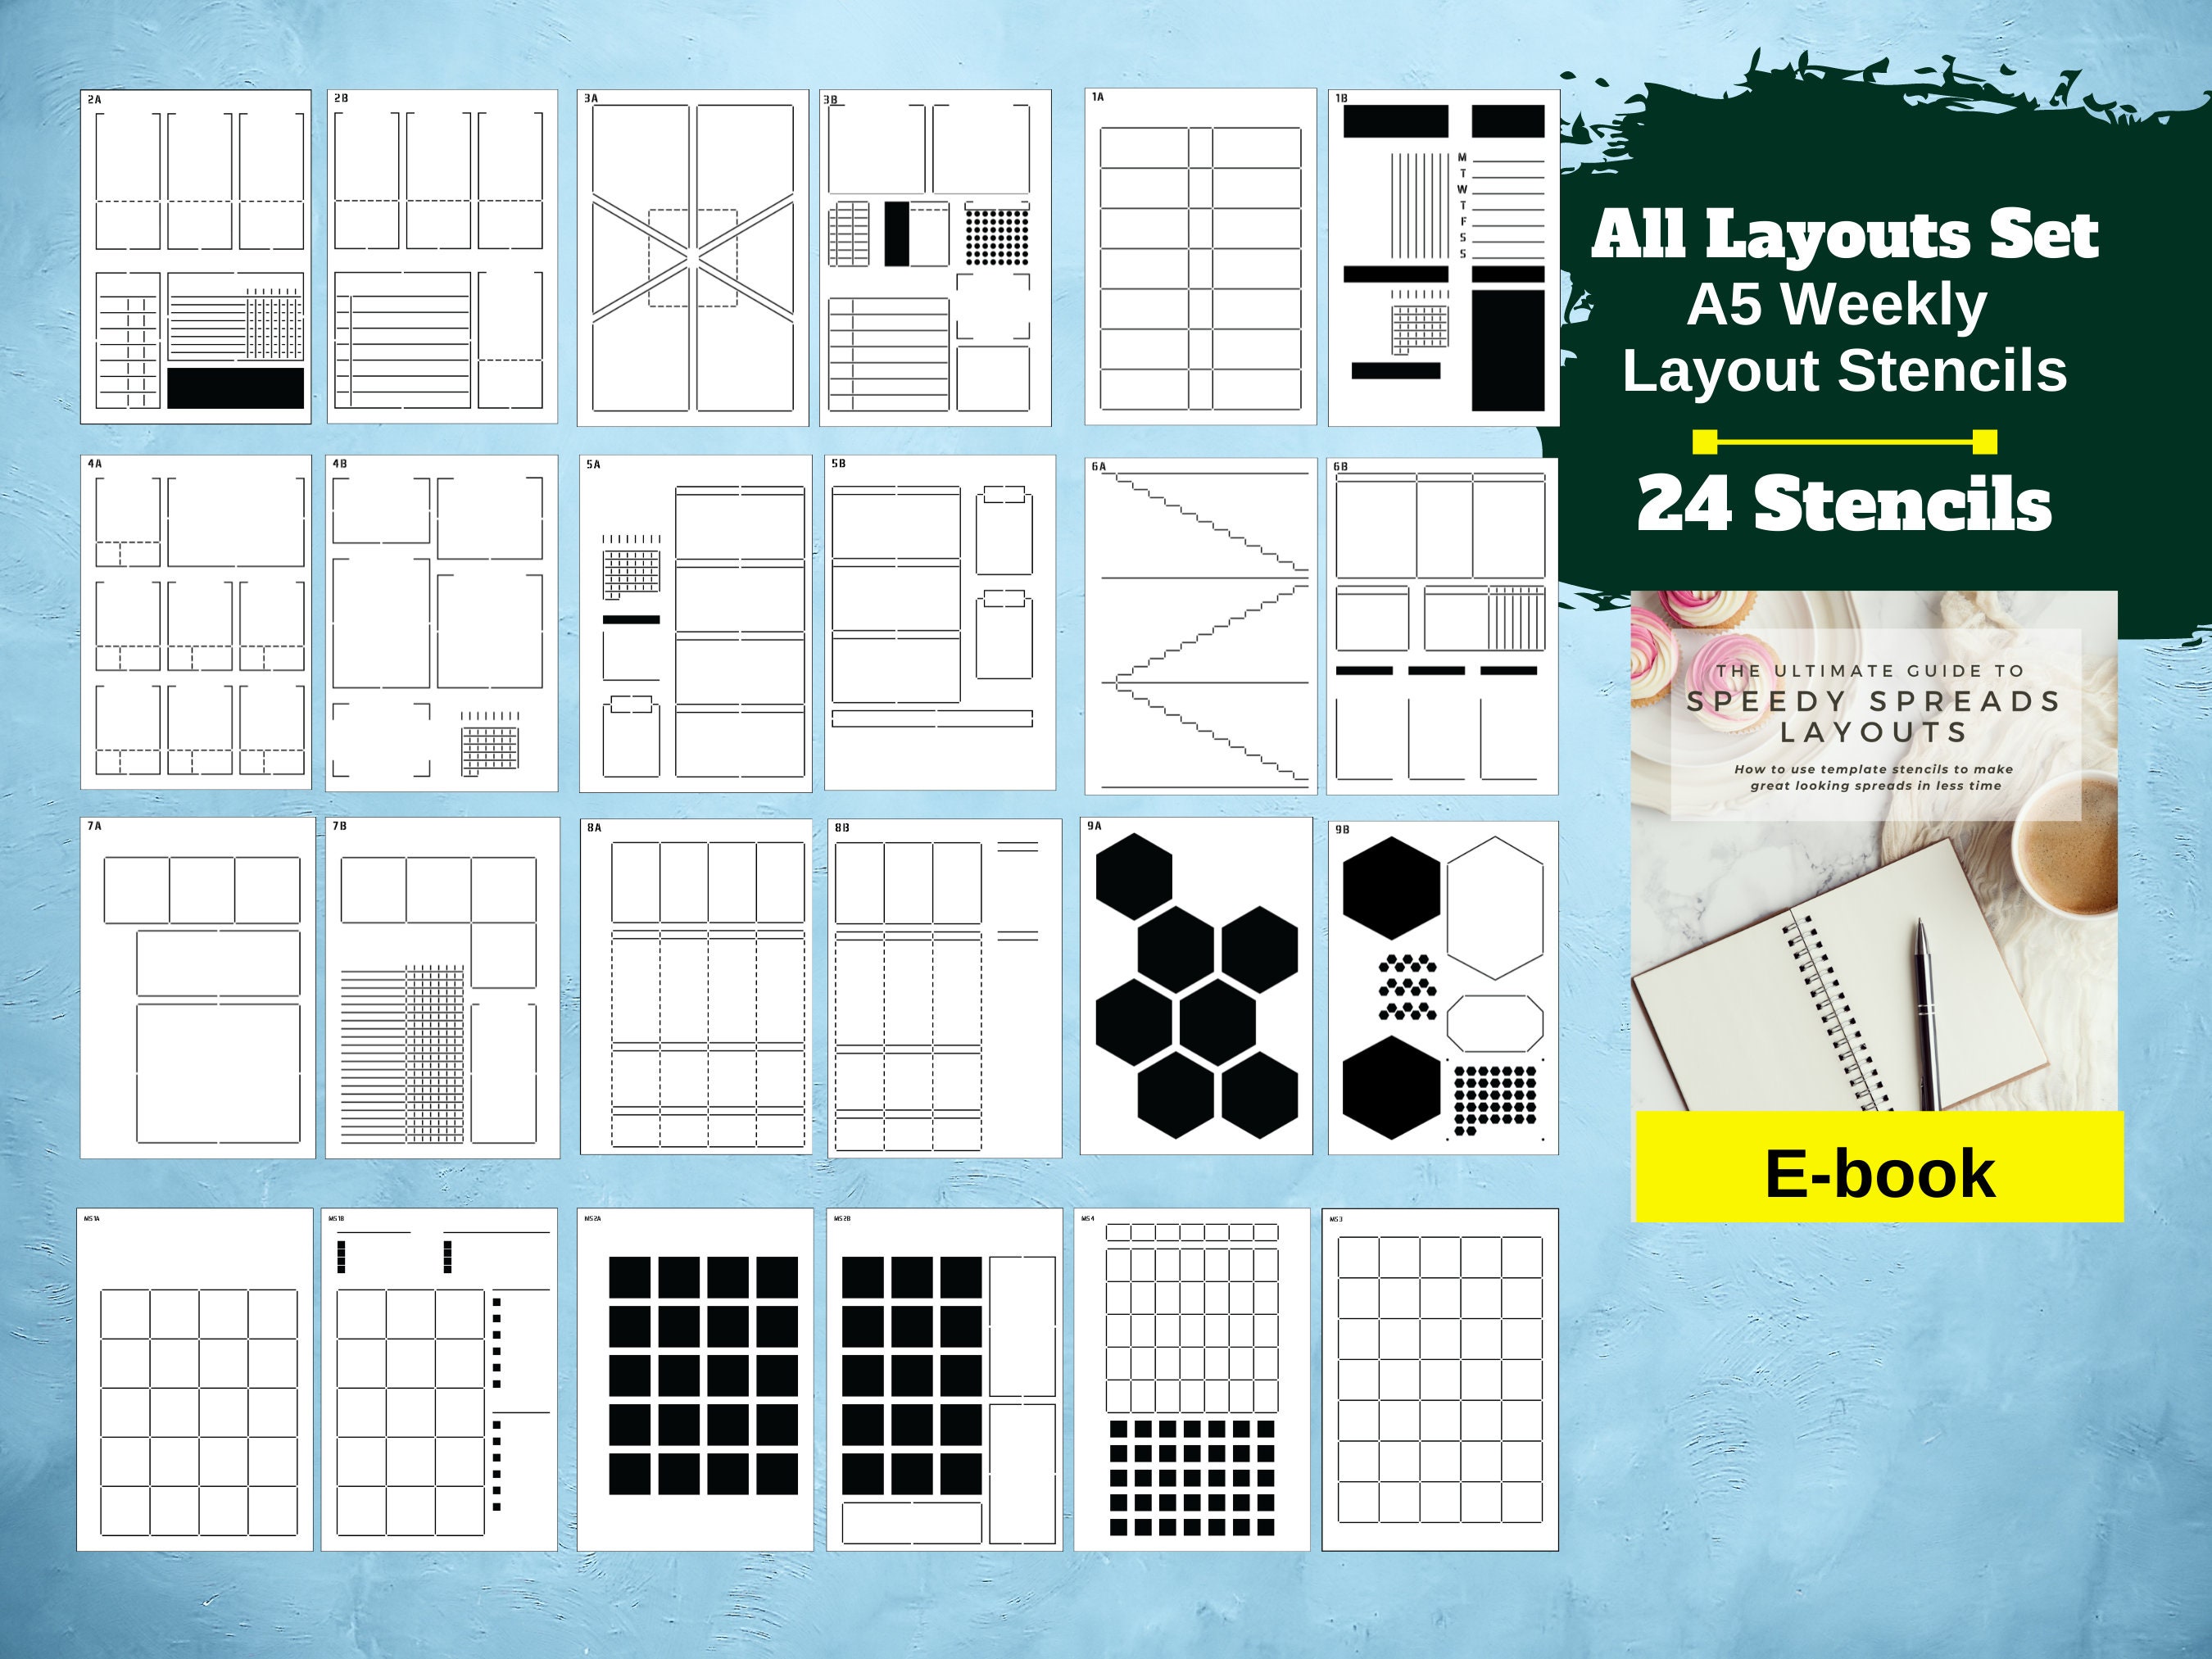 Speedy Spreads Journal Stencils (Daily Layouts) - x7 Day Planner Stencils  for A5 Bullet Journal Dot Grid Notebooks, Save Time on Layouts, DIY Planner